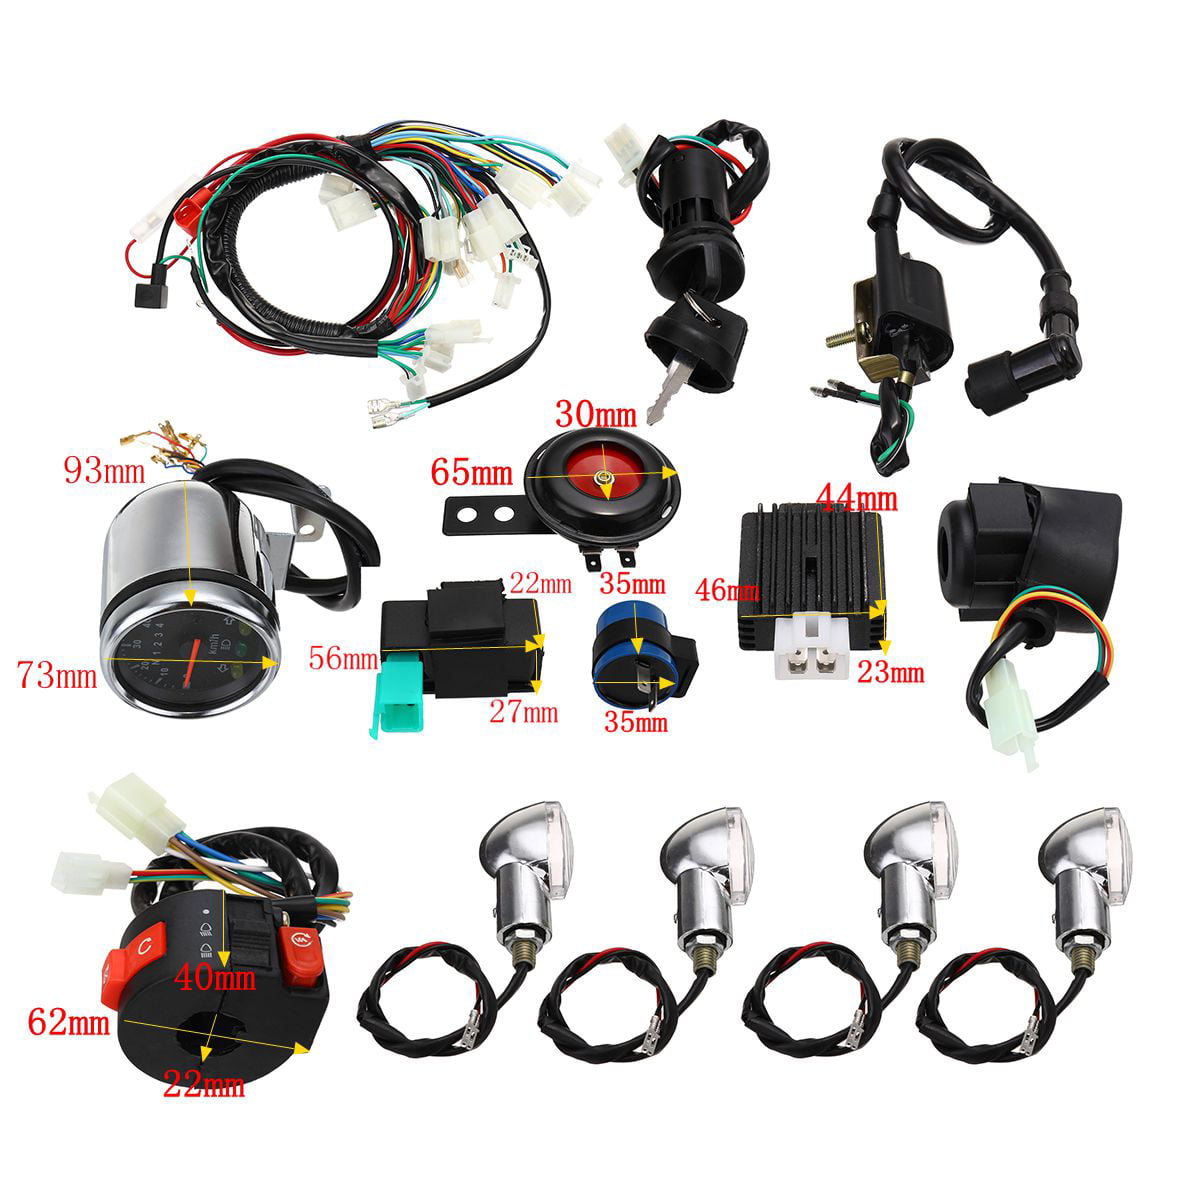 Light Wires PIT QUAD DIRT BIKE ATV BUGGY Electric Start Wiring Harness Loom